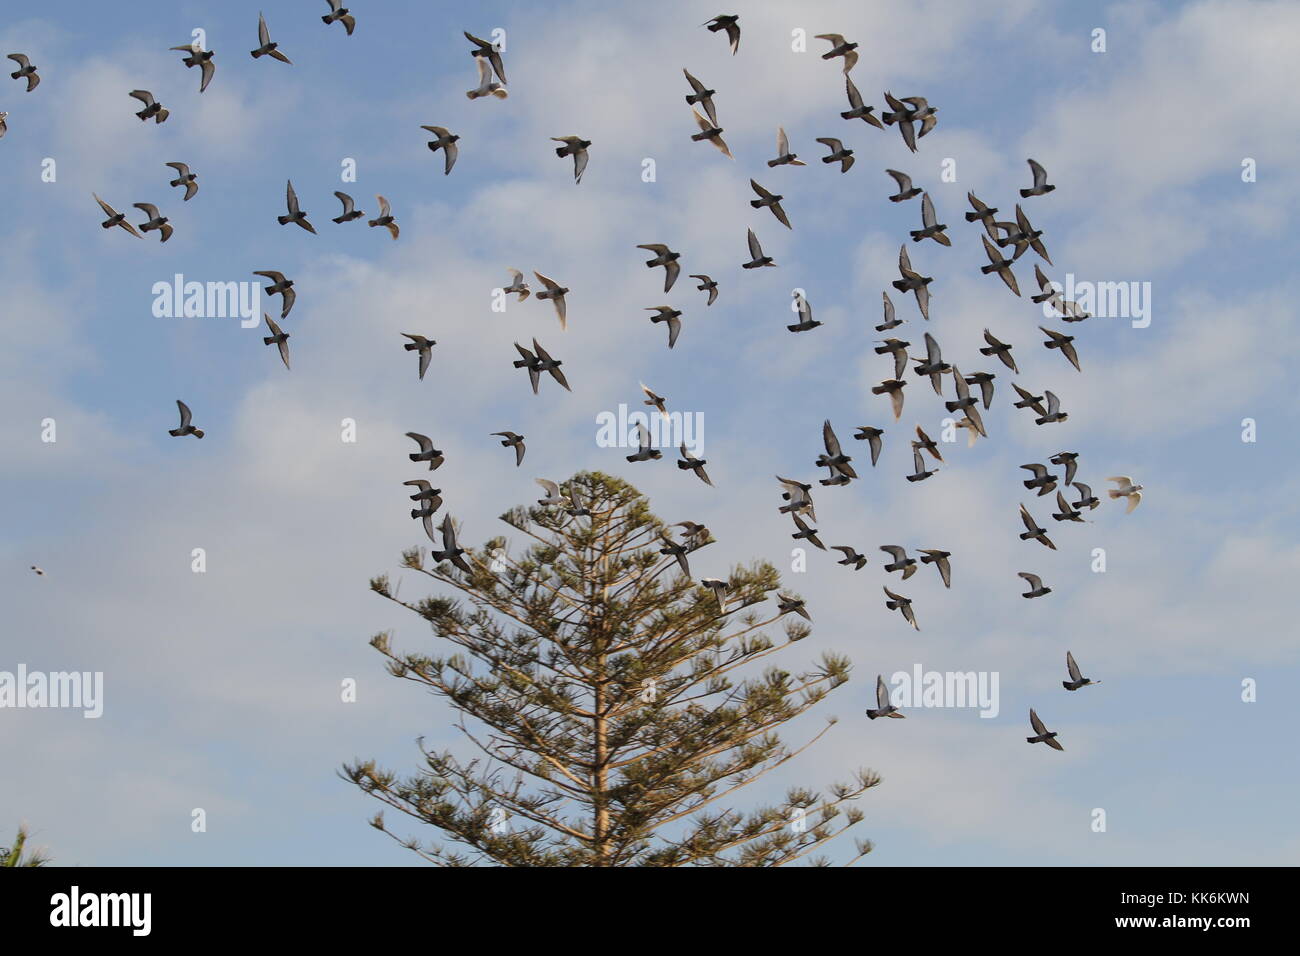 Birds flying around a tree against a blue sky. Photo by Nikki Attree Stock Photo